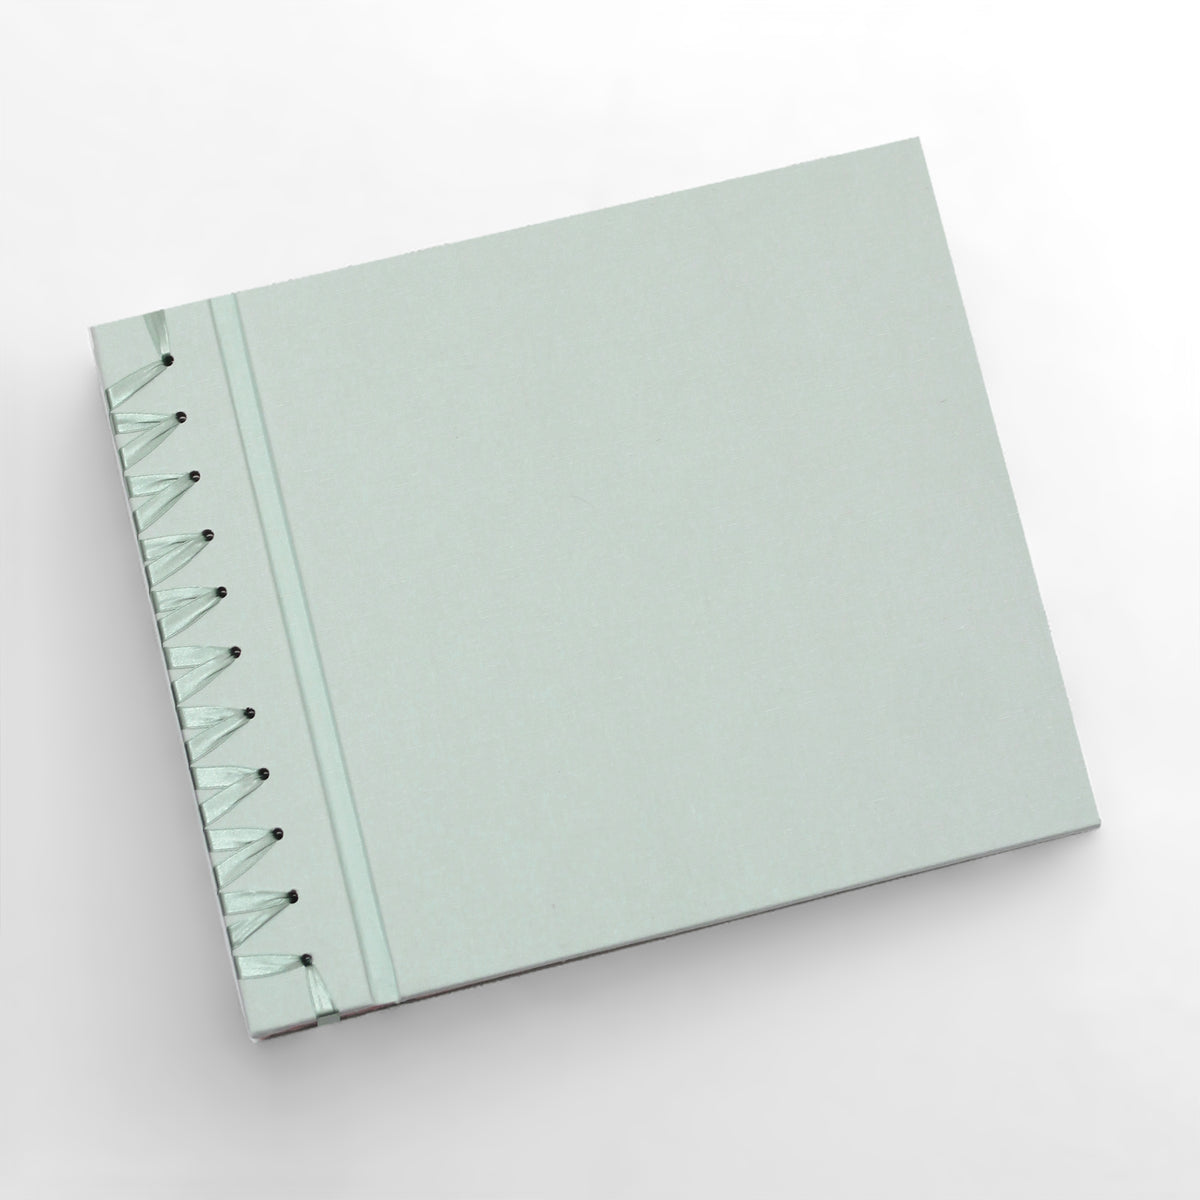 Deluxe 12 x 15 Paper Page Album | Cover: Pastel Blue Cotton | Available Personalized